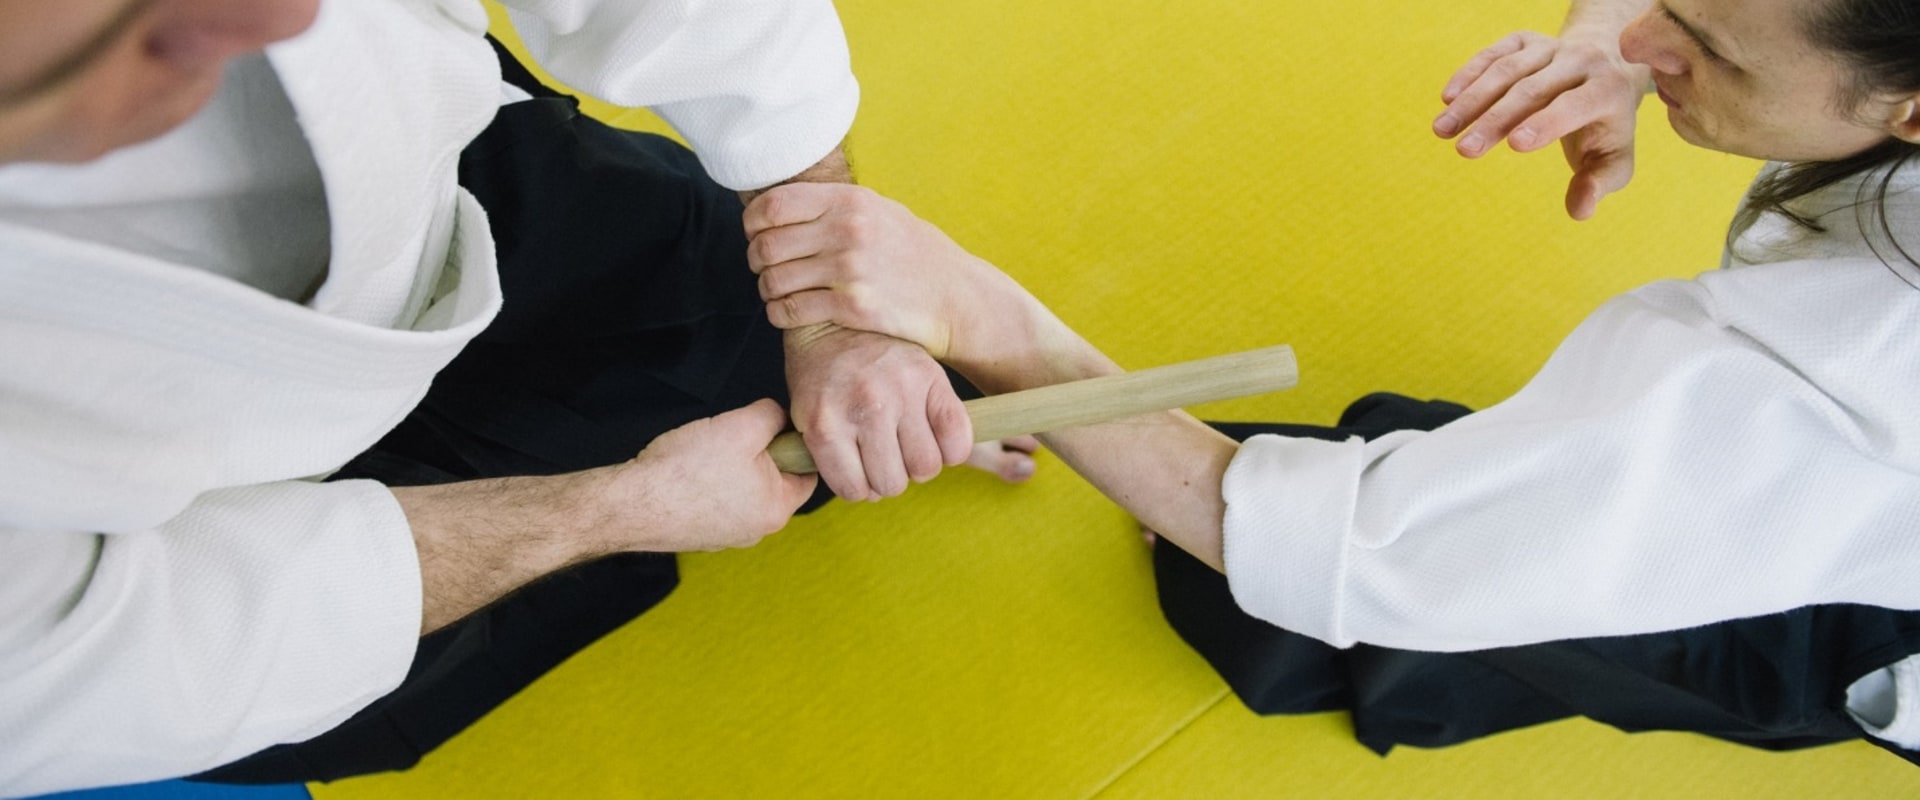 Consistent Effort Over Time: A Guide to Martial Arts Discipline